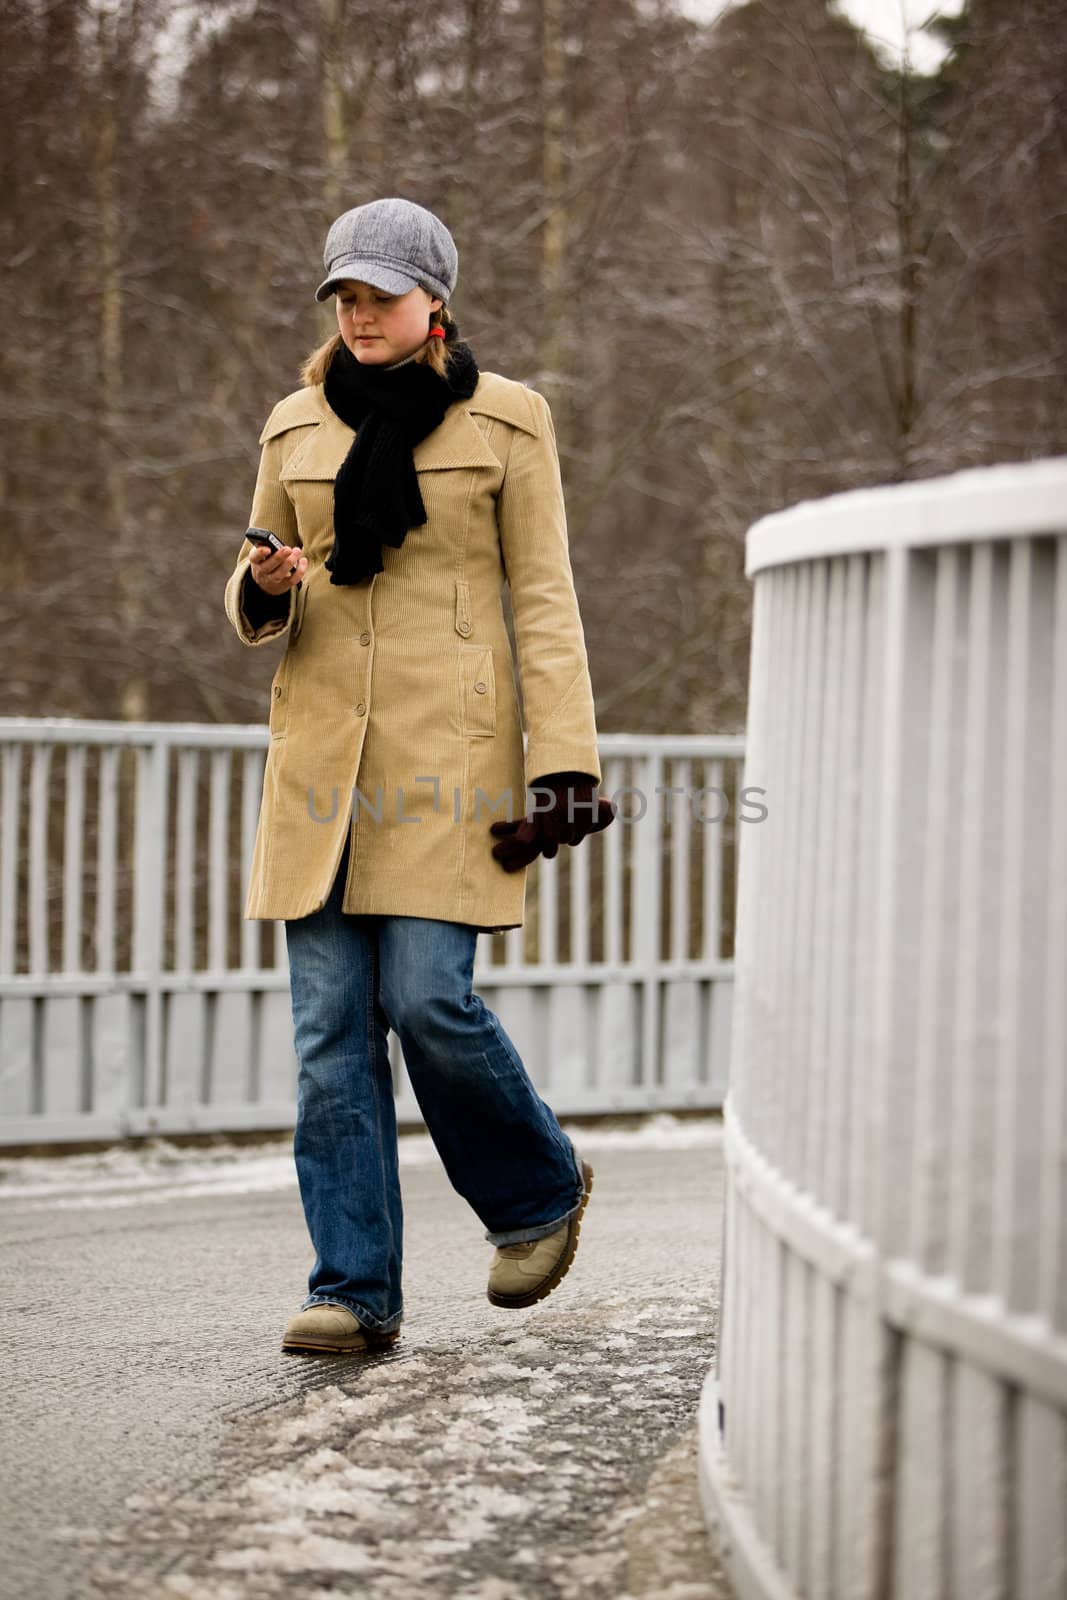 A young woman outside in winter user a cell phone